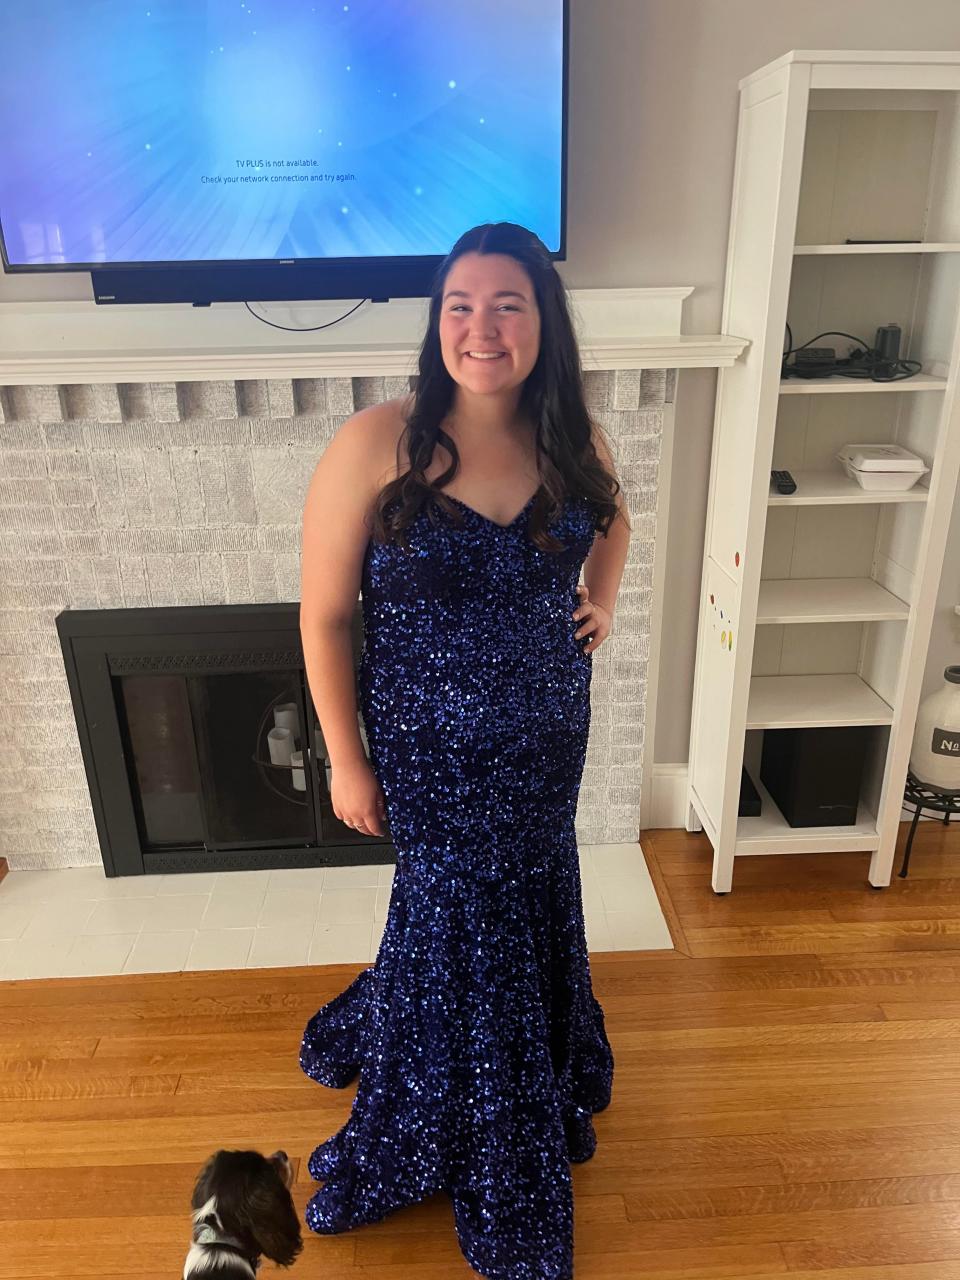 Dakota Costa, a senior at Taunton High School, wears a prom dress that was rescued from a fire that destroyed her family's home.